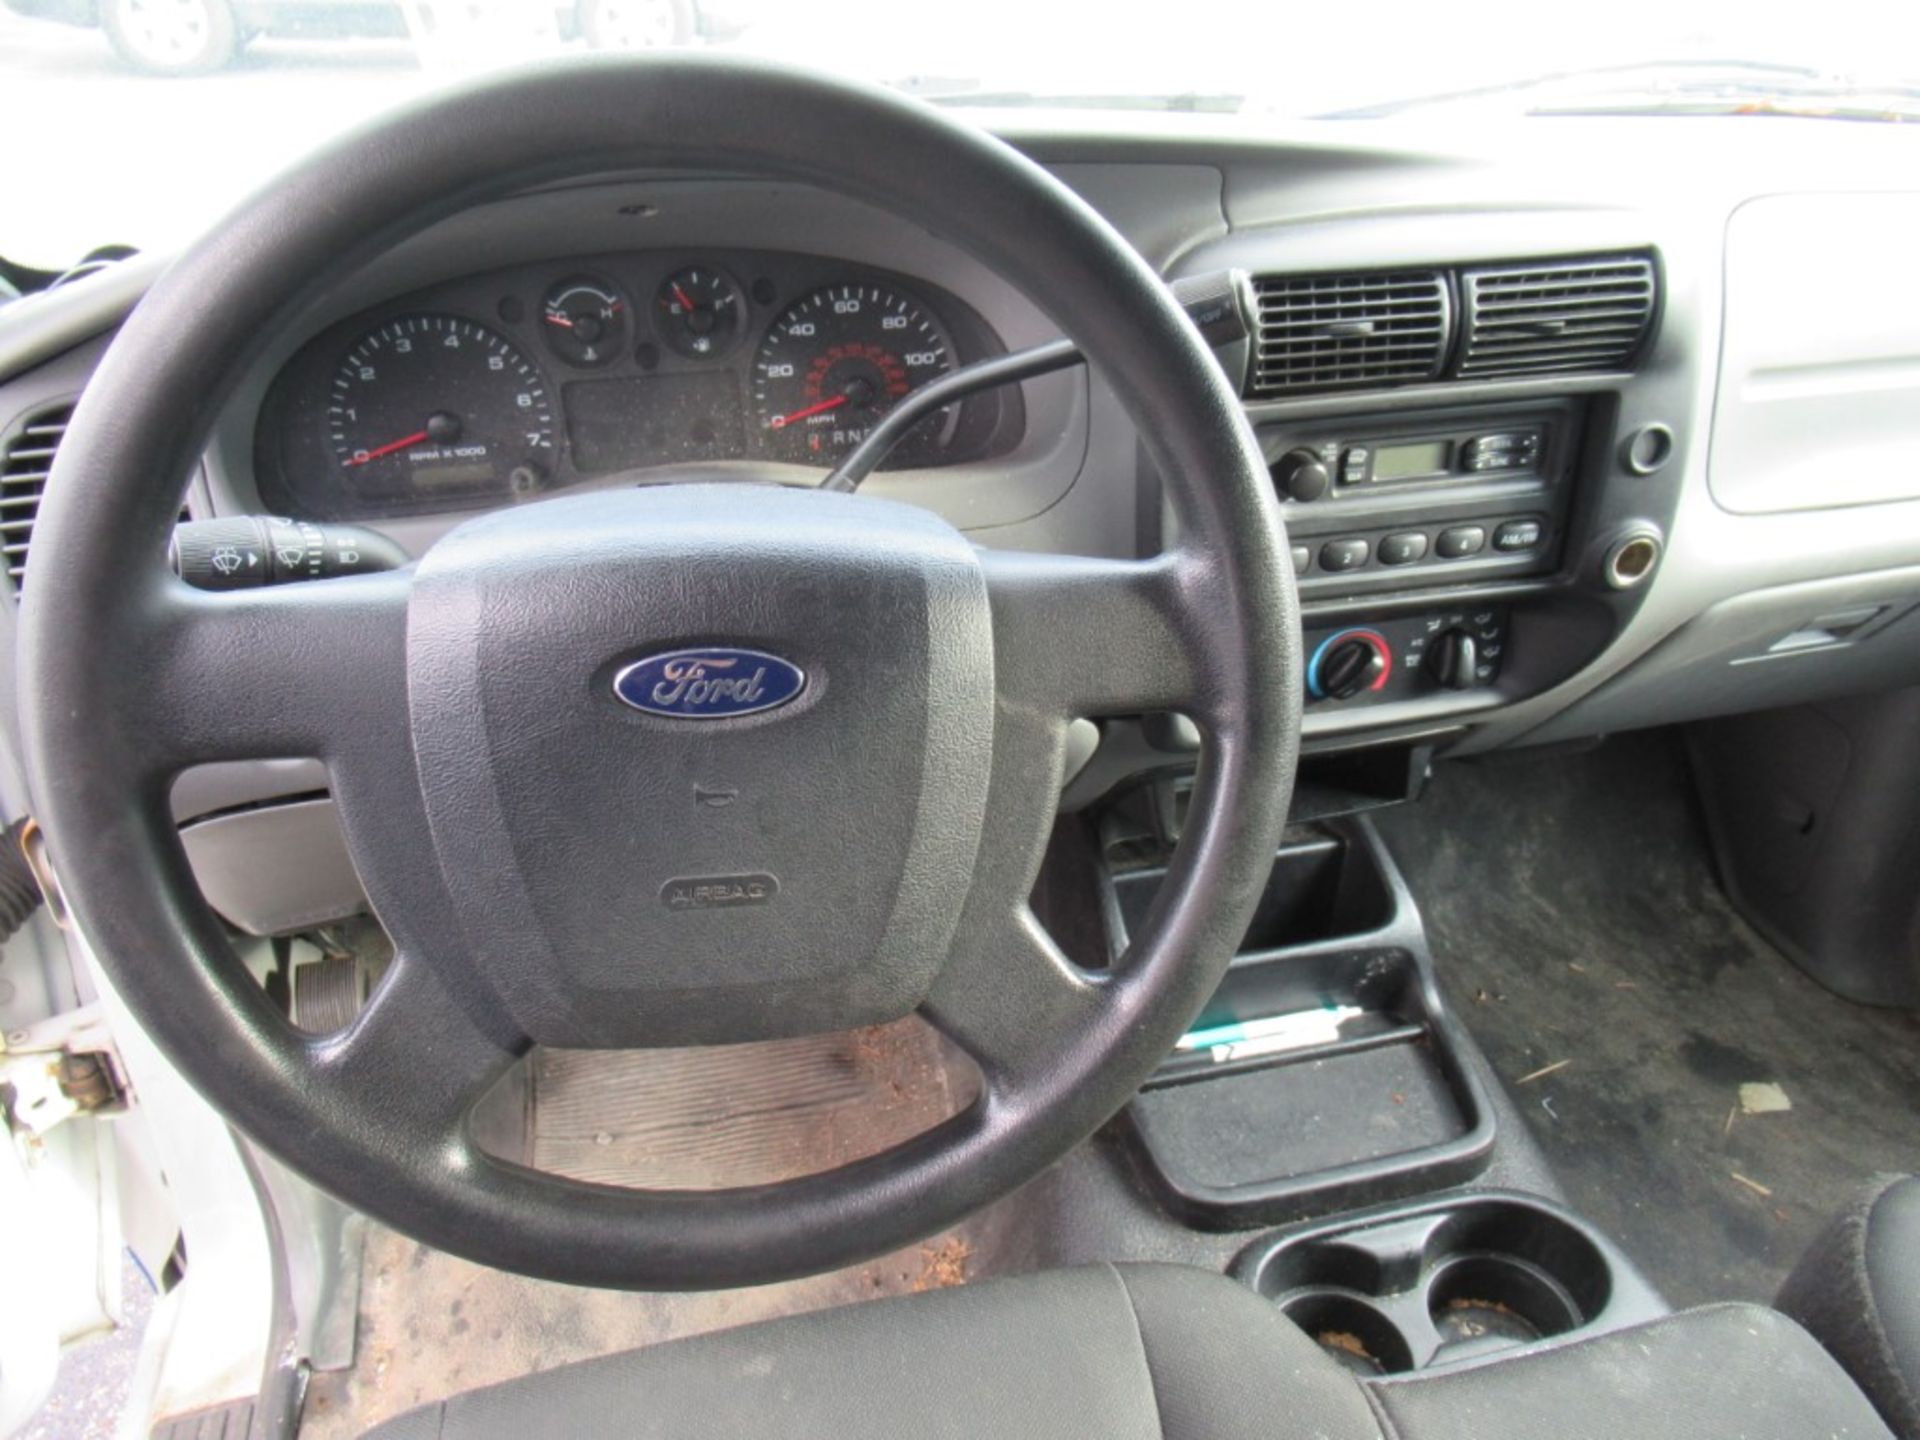 2009 Ford Ranger Pickup, VIN 1FTYR10D29PA65406, Regular Cab, Automatic, AC, AM/FM, Cap, Would Not - Image 20 of 23